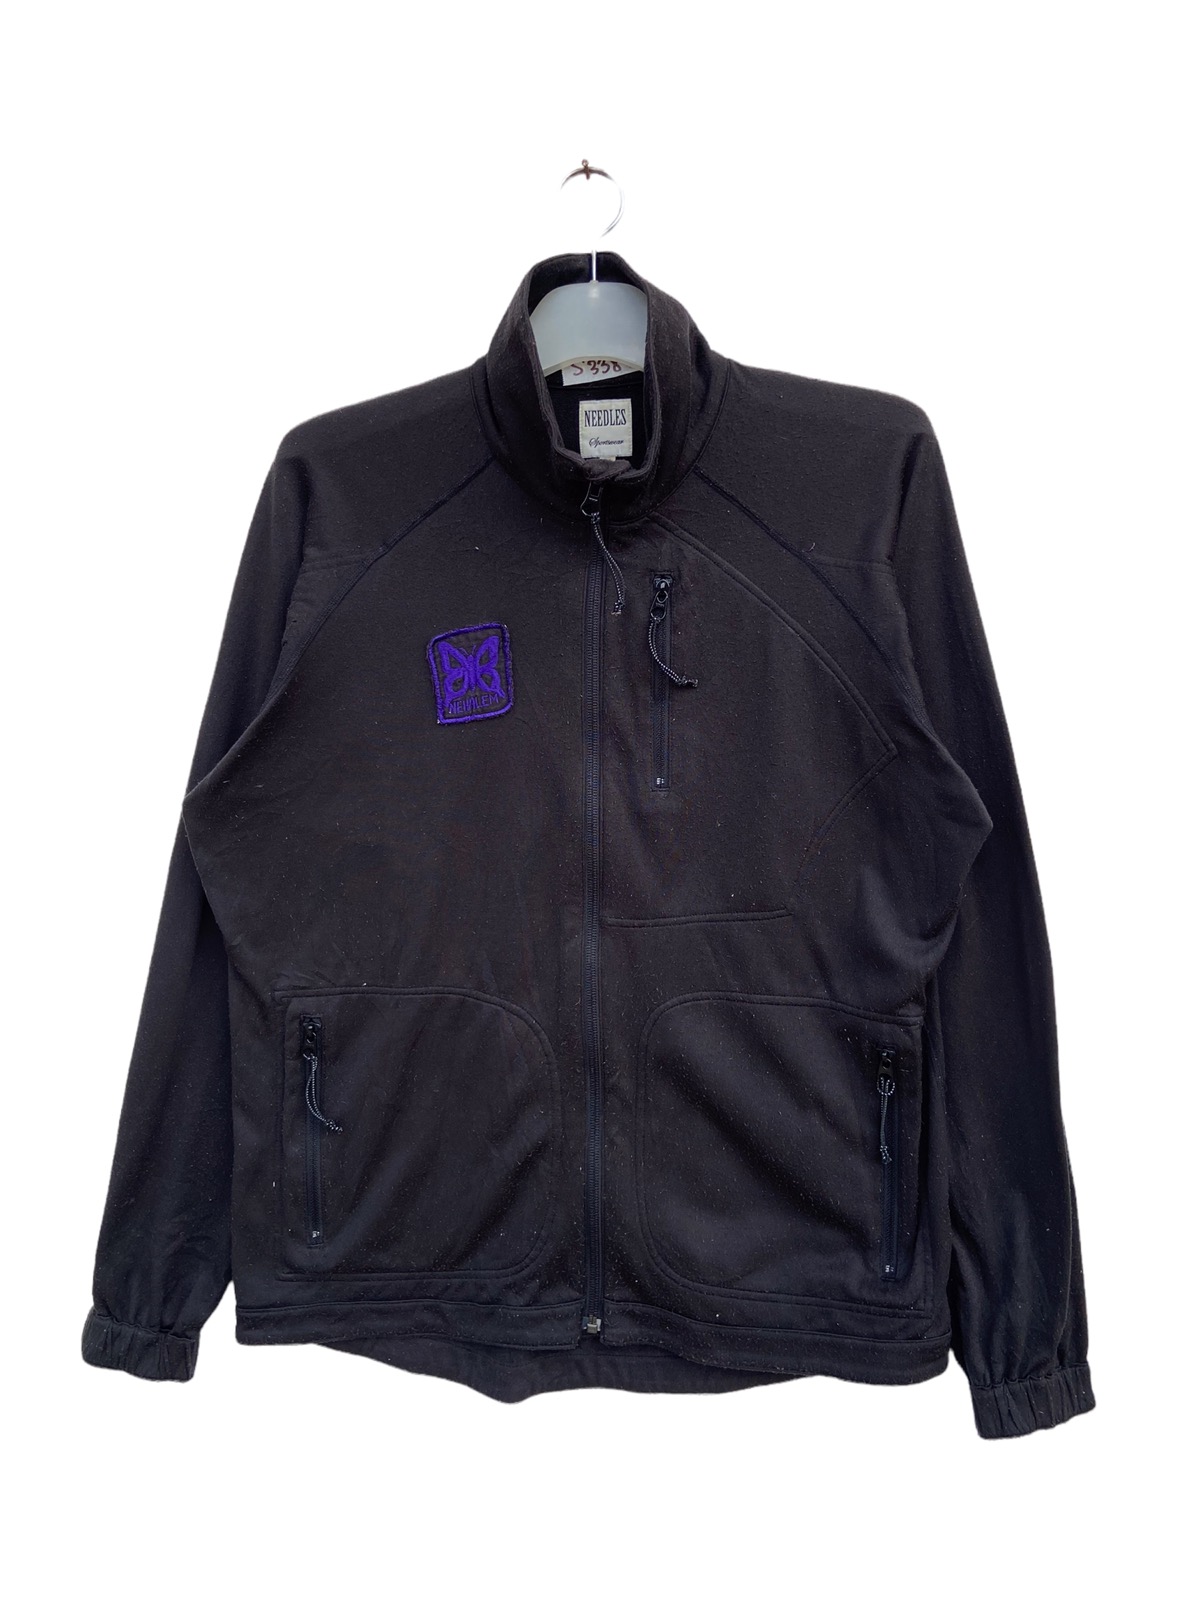 Needles Sportwear Nepenthes Tracktop - 1